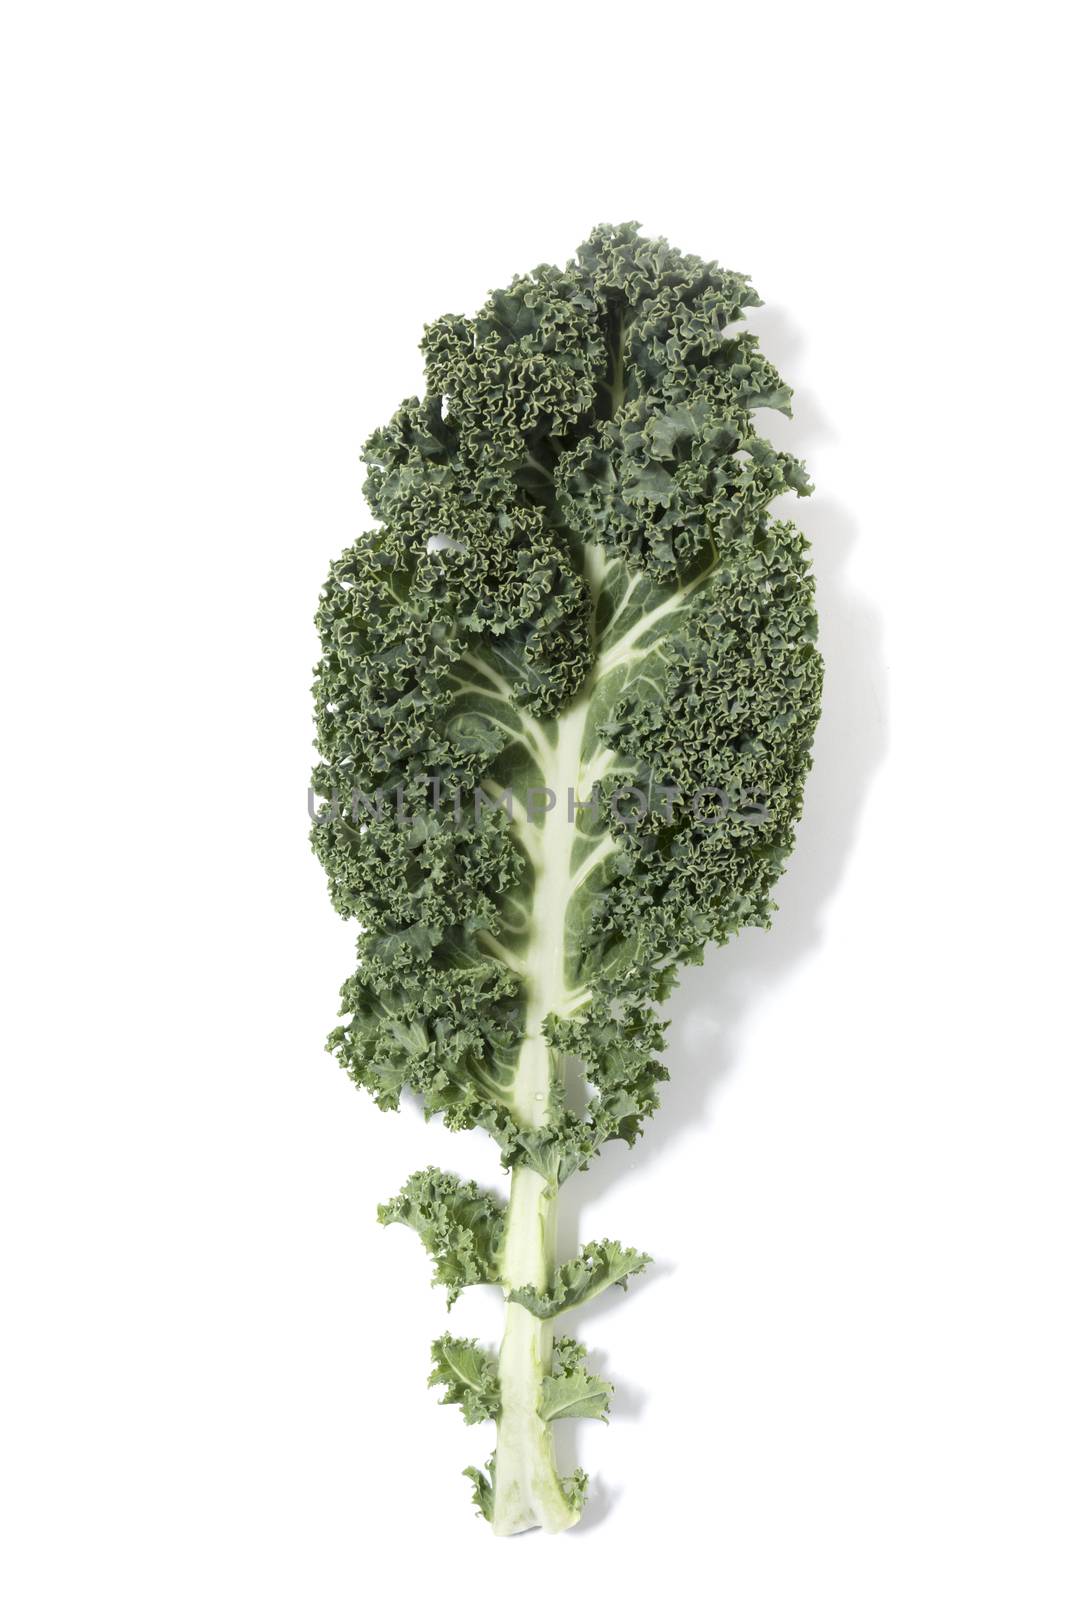 Curly leaf kale isolated on a white background.